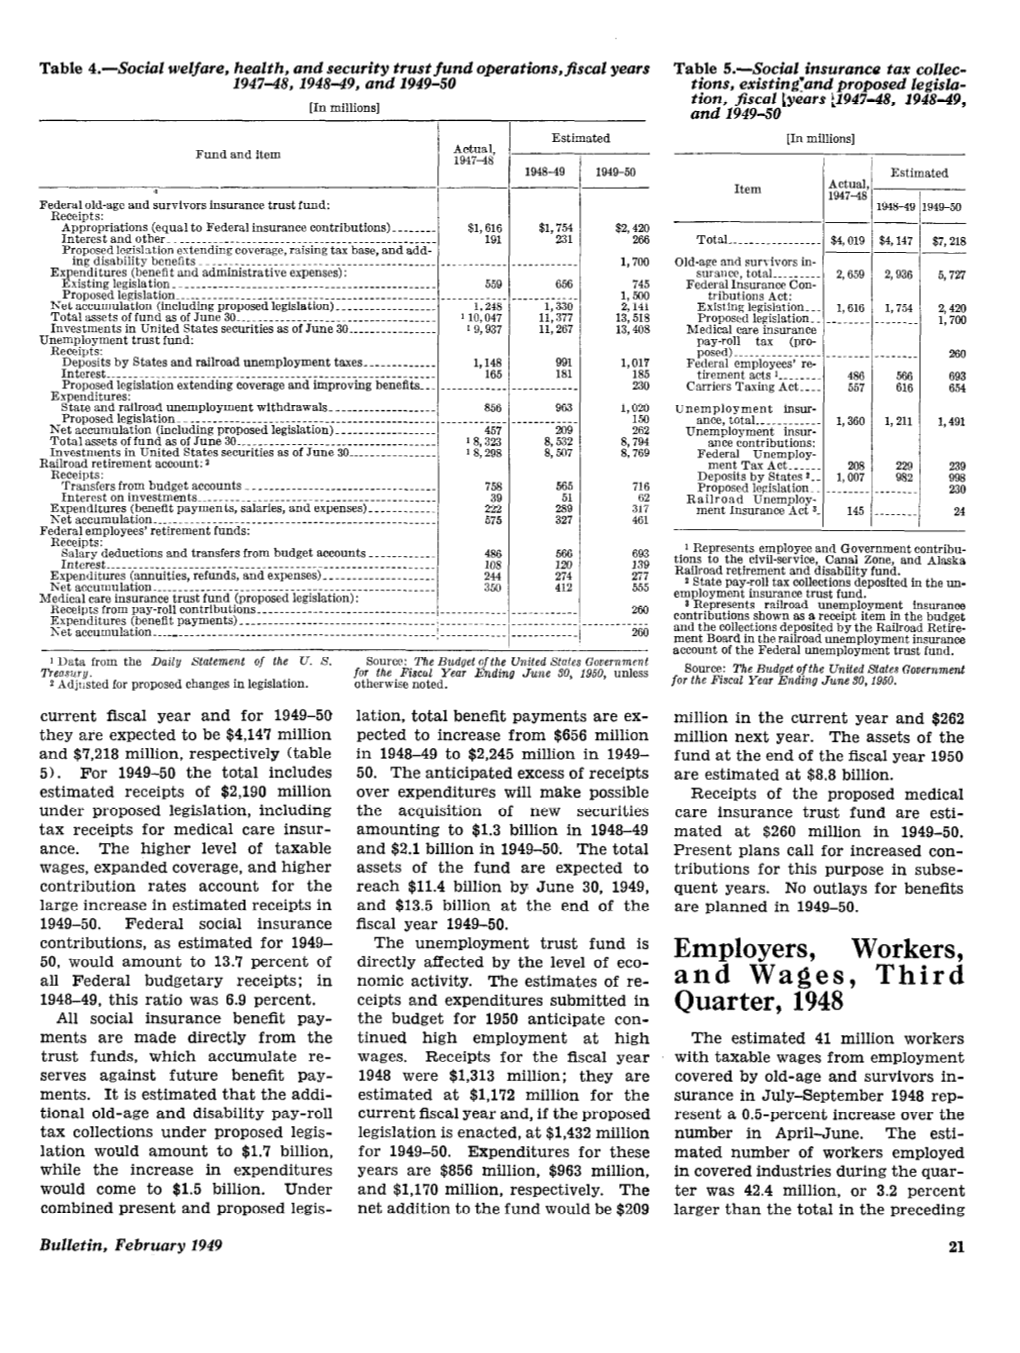 Employers, Workers, and Wages, Third Quarter, 1948